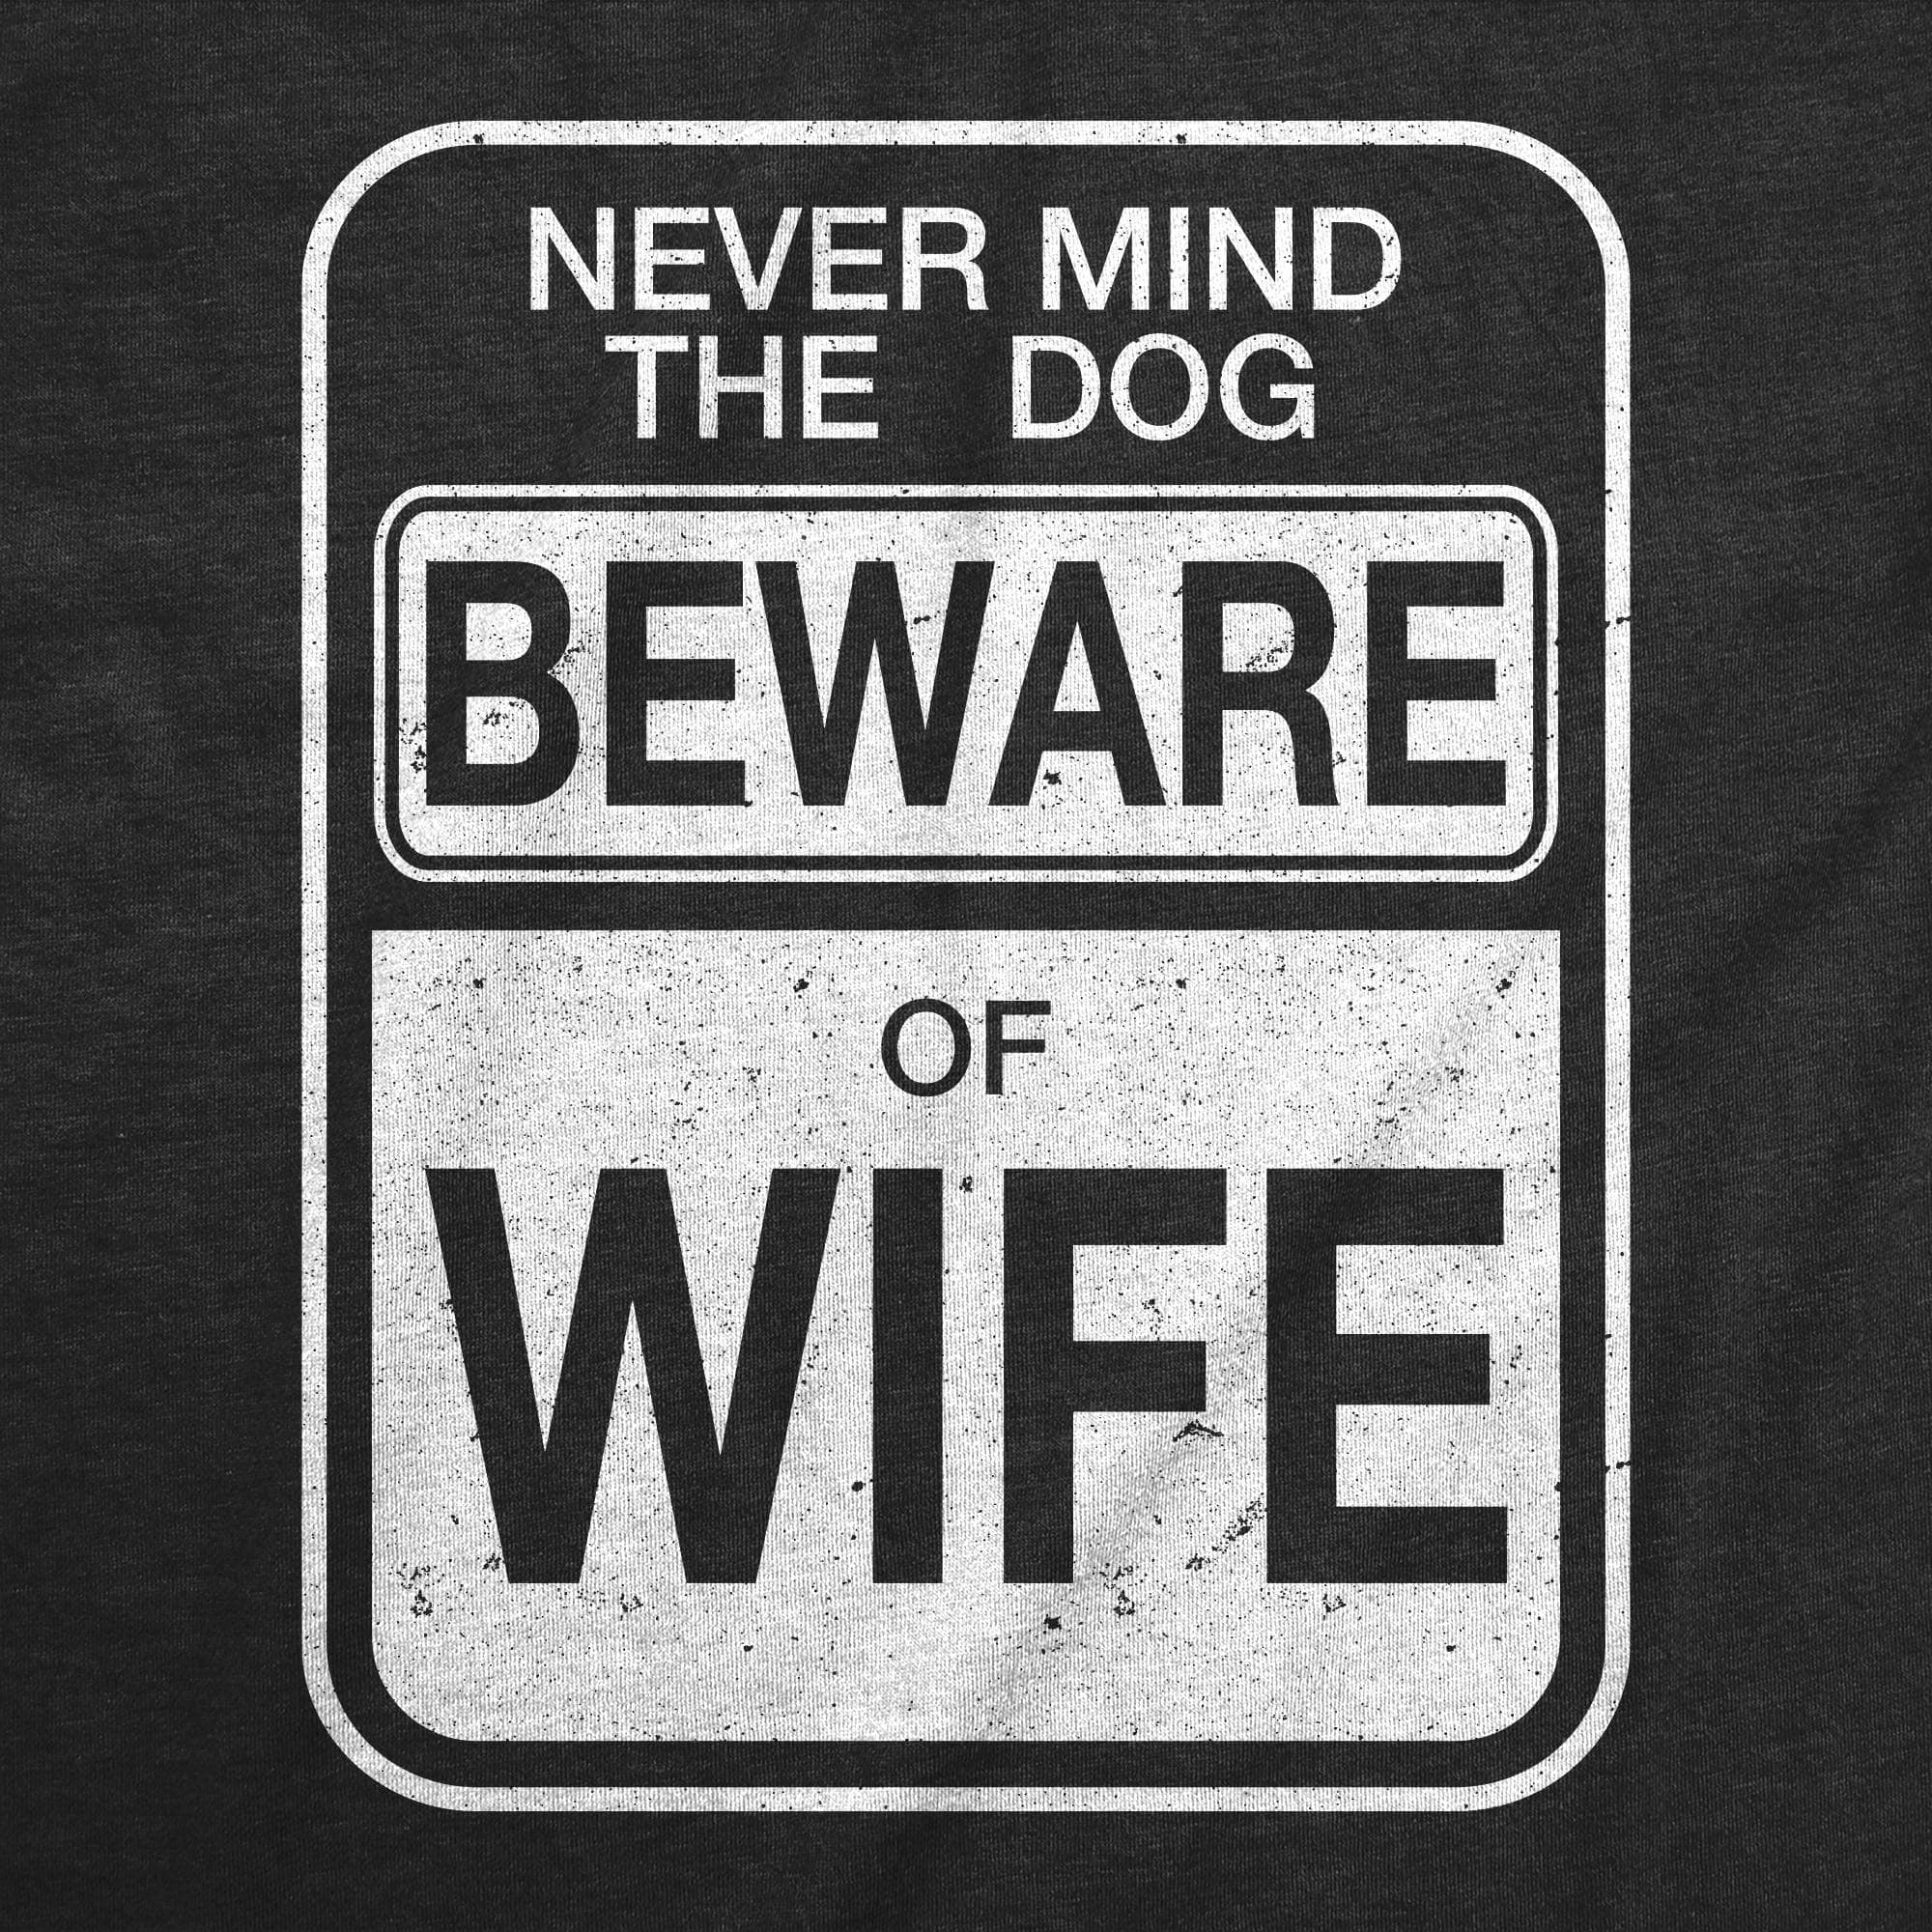 Beware of Wife Forget the Dog Men's Tshirt  -  Crazy Dog T-Shirts